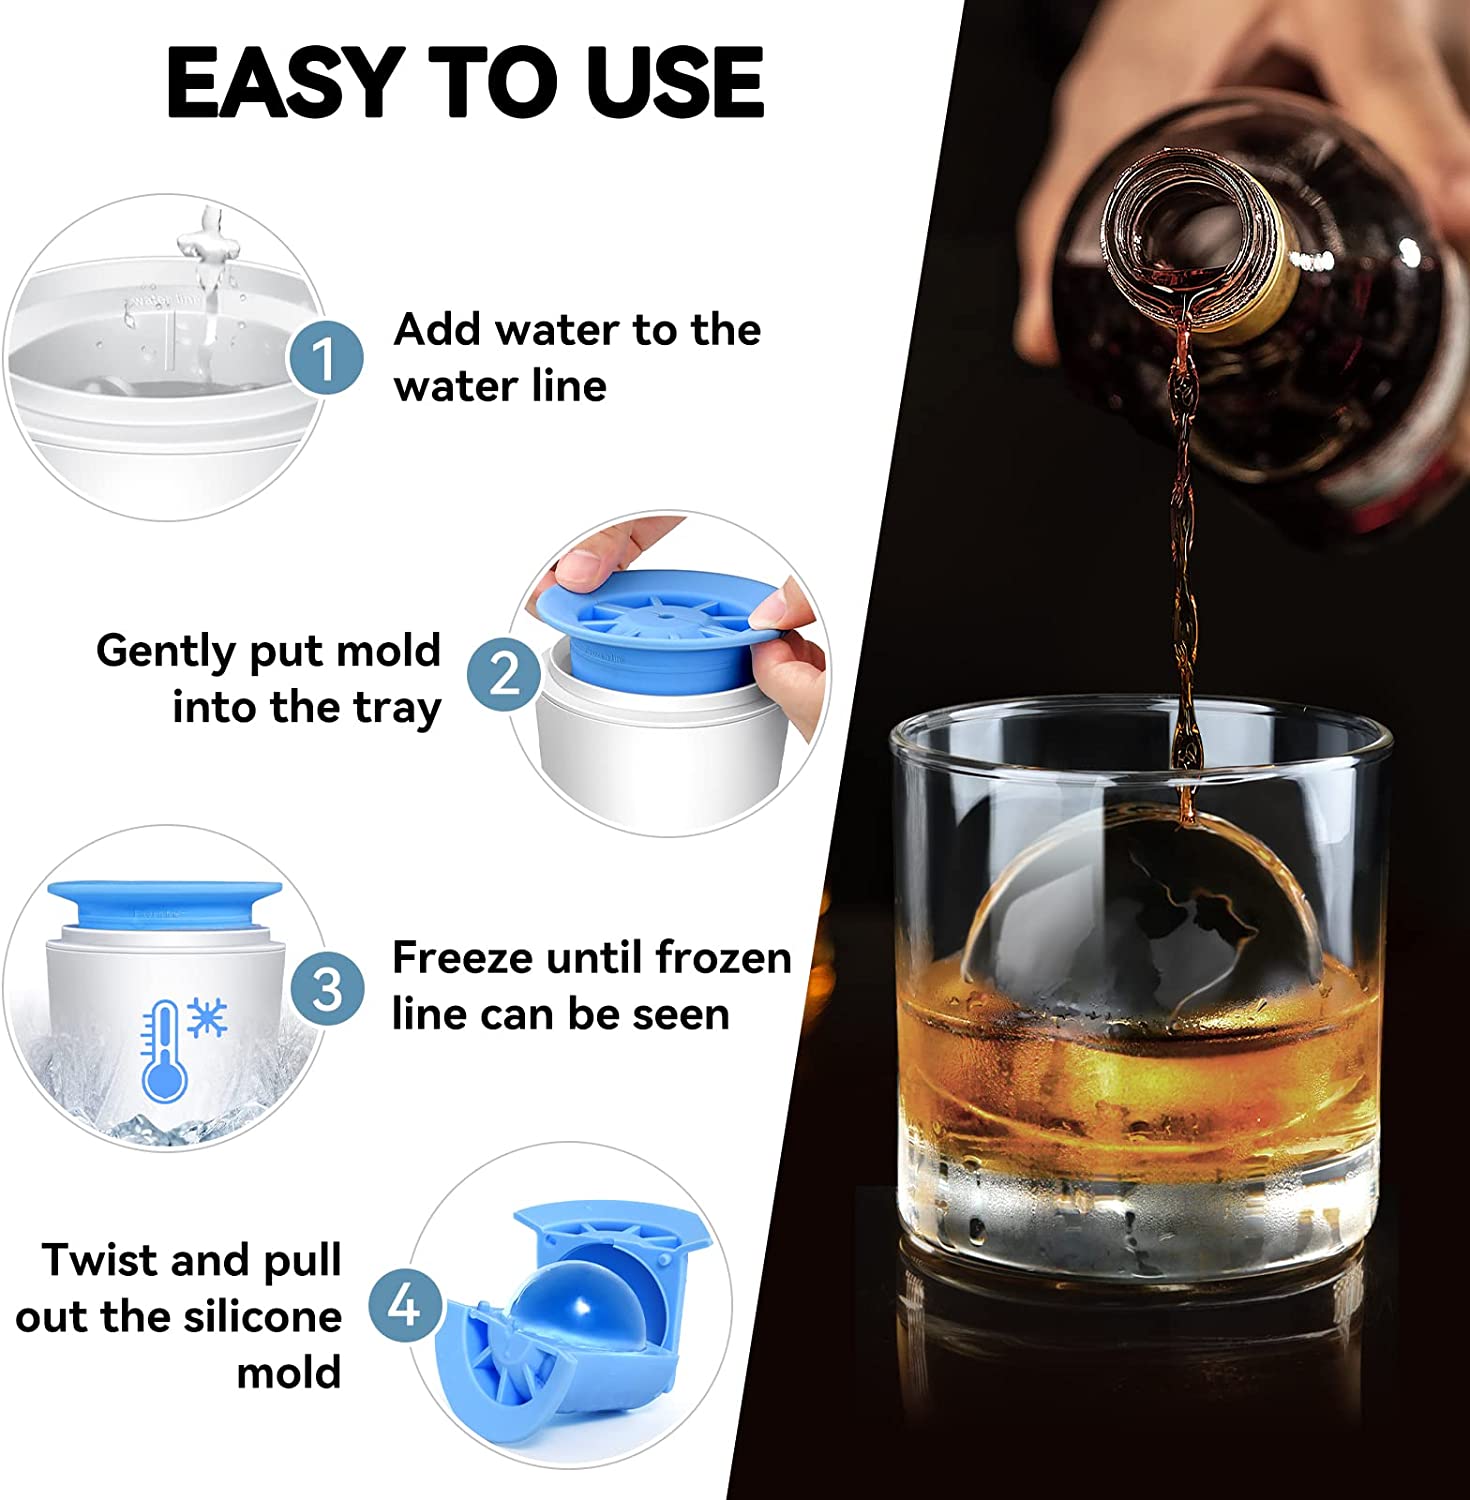 longzon Mini Round Ice Cube Tray with Lid and Bin, 2 pack Silicone Ice